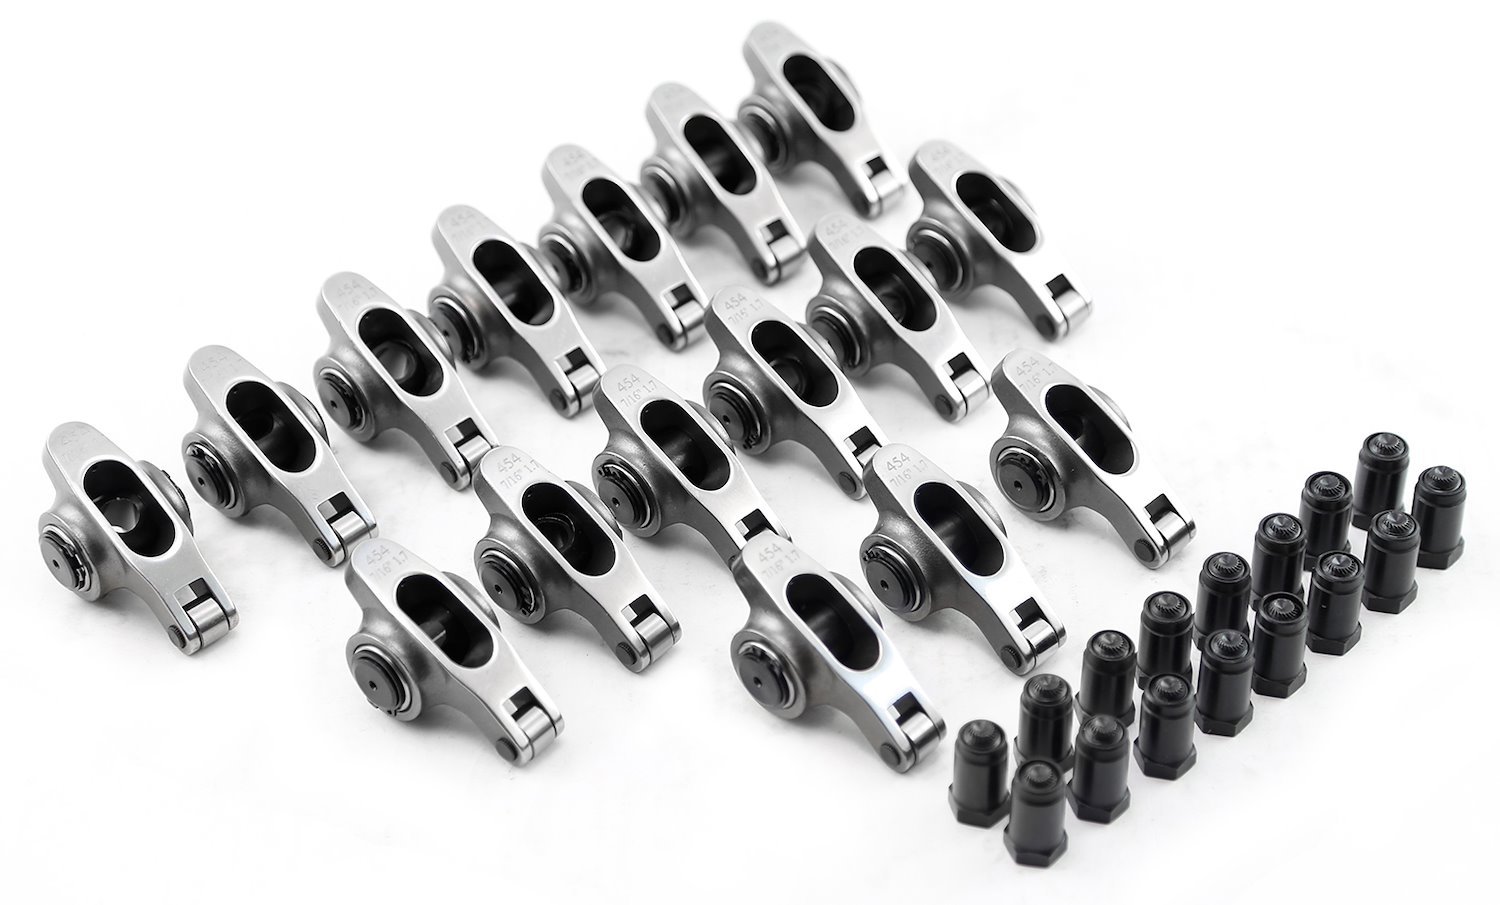 Stainless Steel Roller Rocker Arm Set Small Block Ford 302, 351C Cleveland, Ratio: 1.73